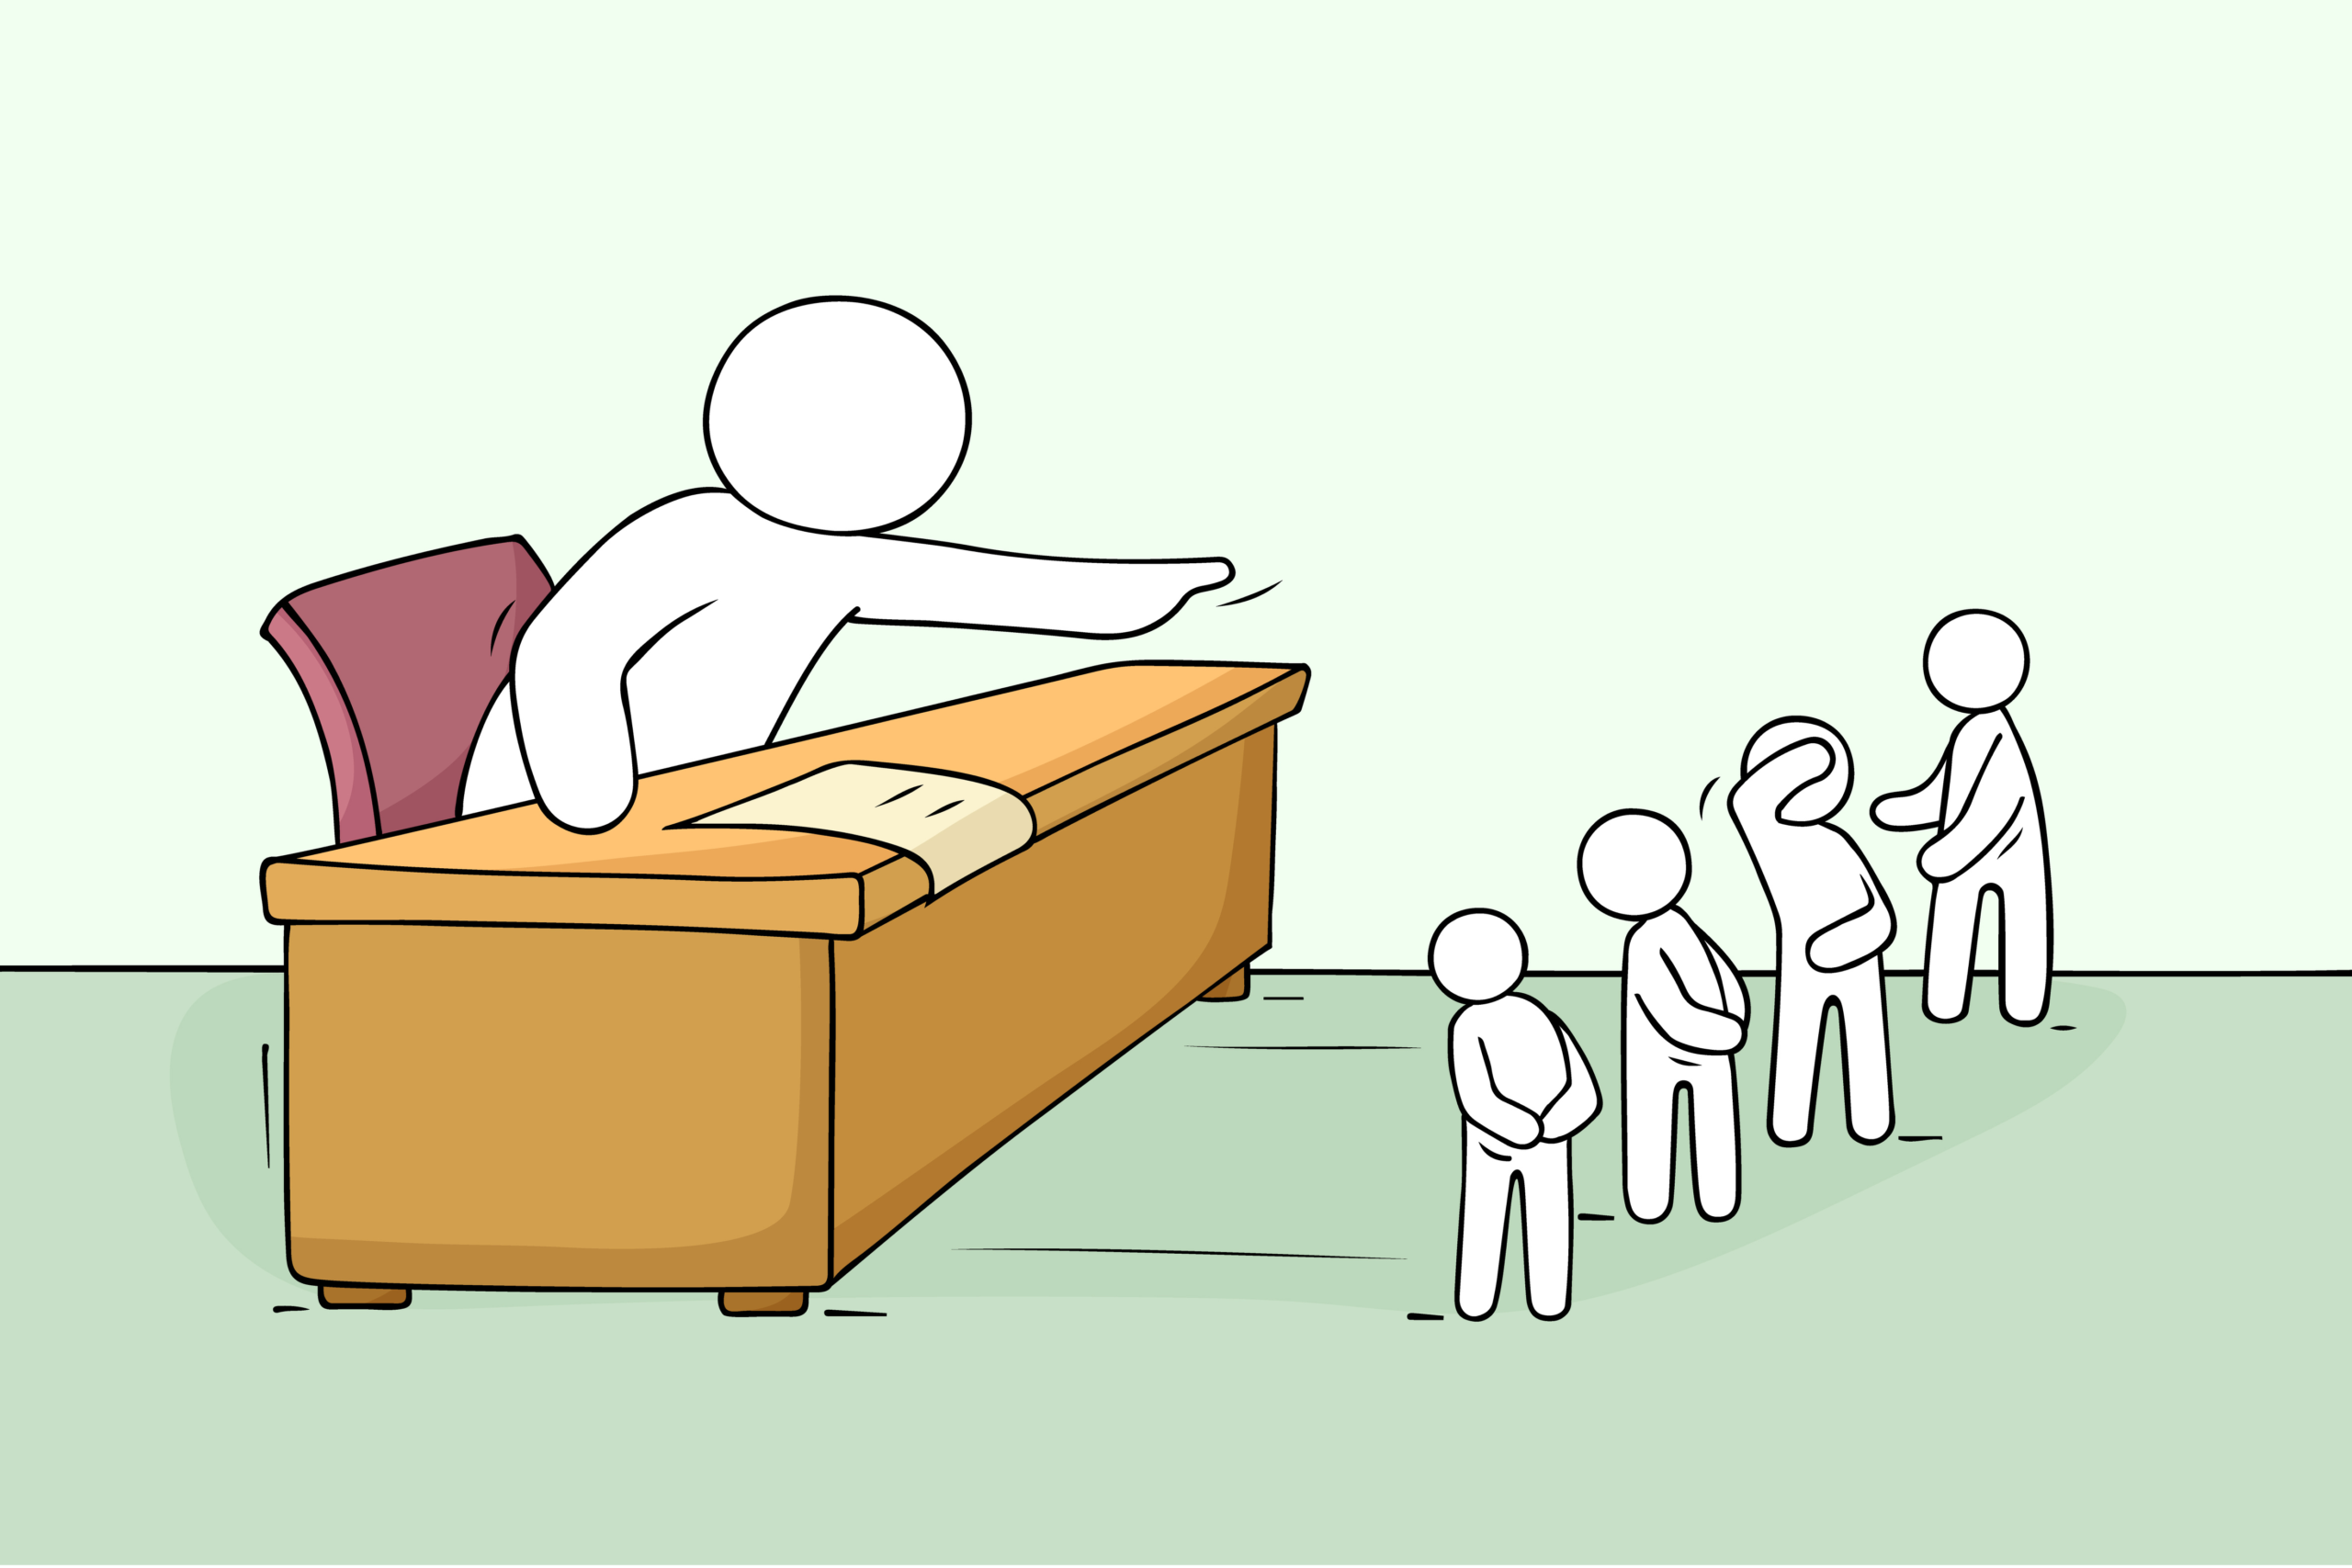 Cartoon outline of a person towers over a yellow desk with one finger outreached. In front of the desk are smaller outlined people who are turning away or holding their hands behind their backs.